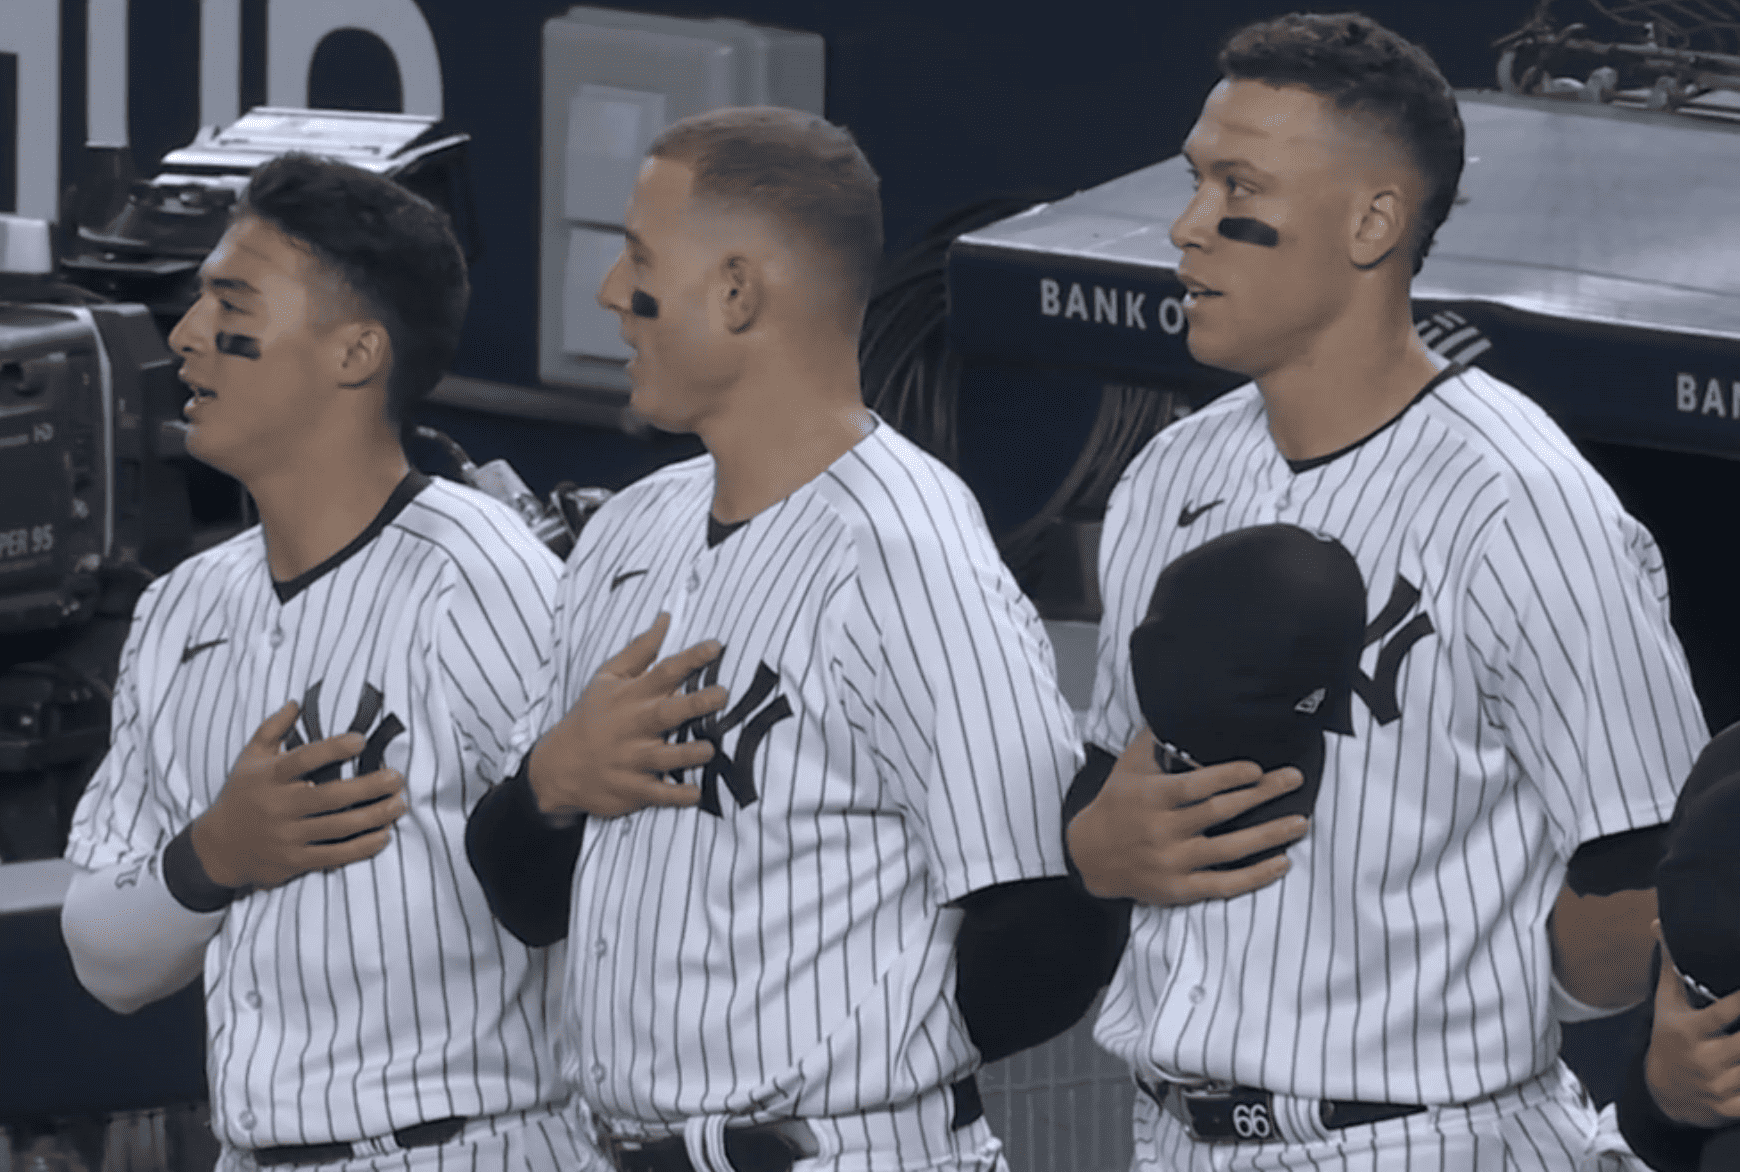 How Yankees Re-Signing Anthony Rizzo Could Impact Aaron Judge's